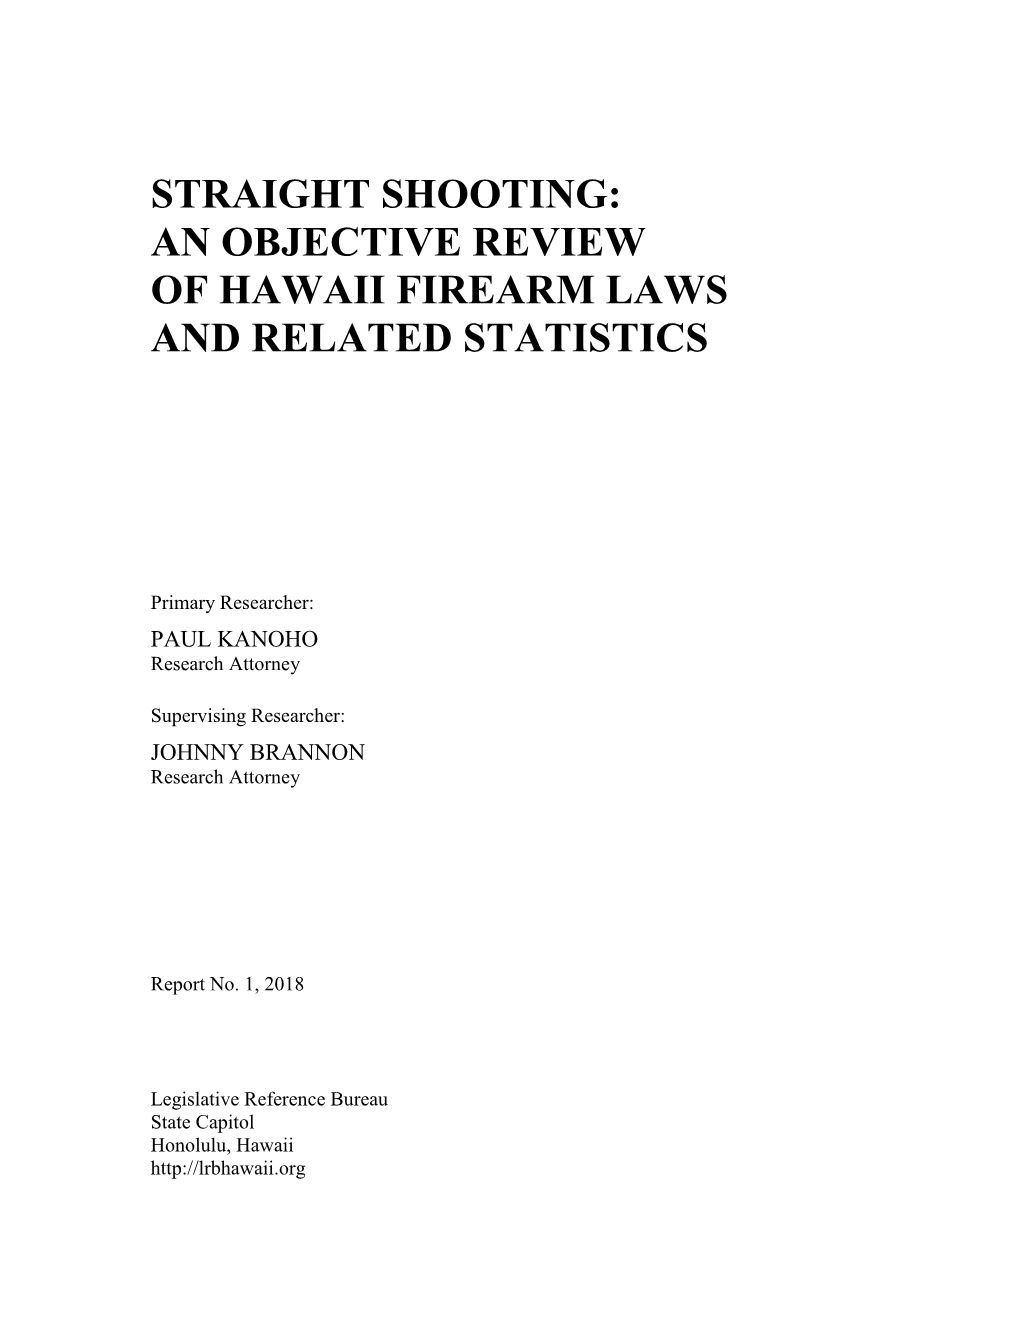 Straight Shooting: an Objective Review of Hawaii Firearm Laws and Related Statistics